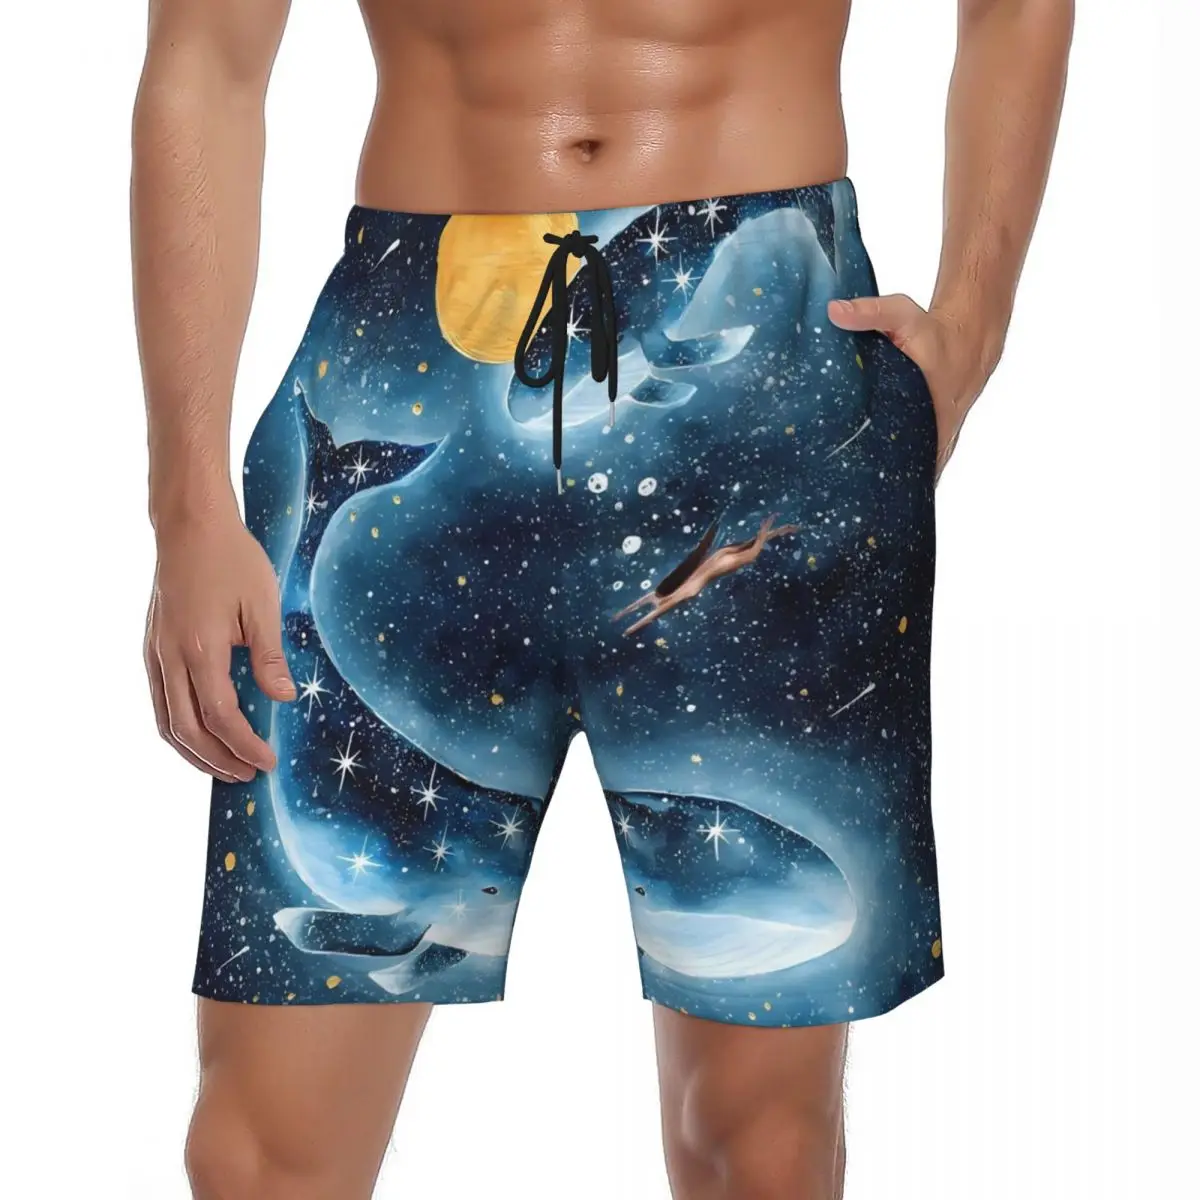 

Summer Gym Shorts Male Starry Sky Blue Whales Running Surf Blue Animation Beach Shorts Hawaii Comfortable Swim Trunks Plus Size